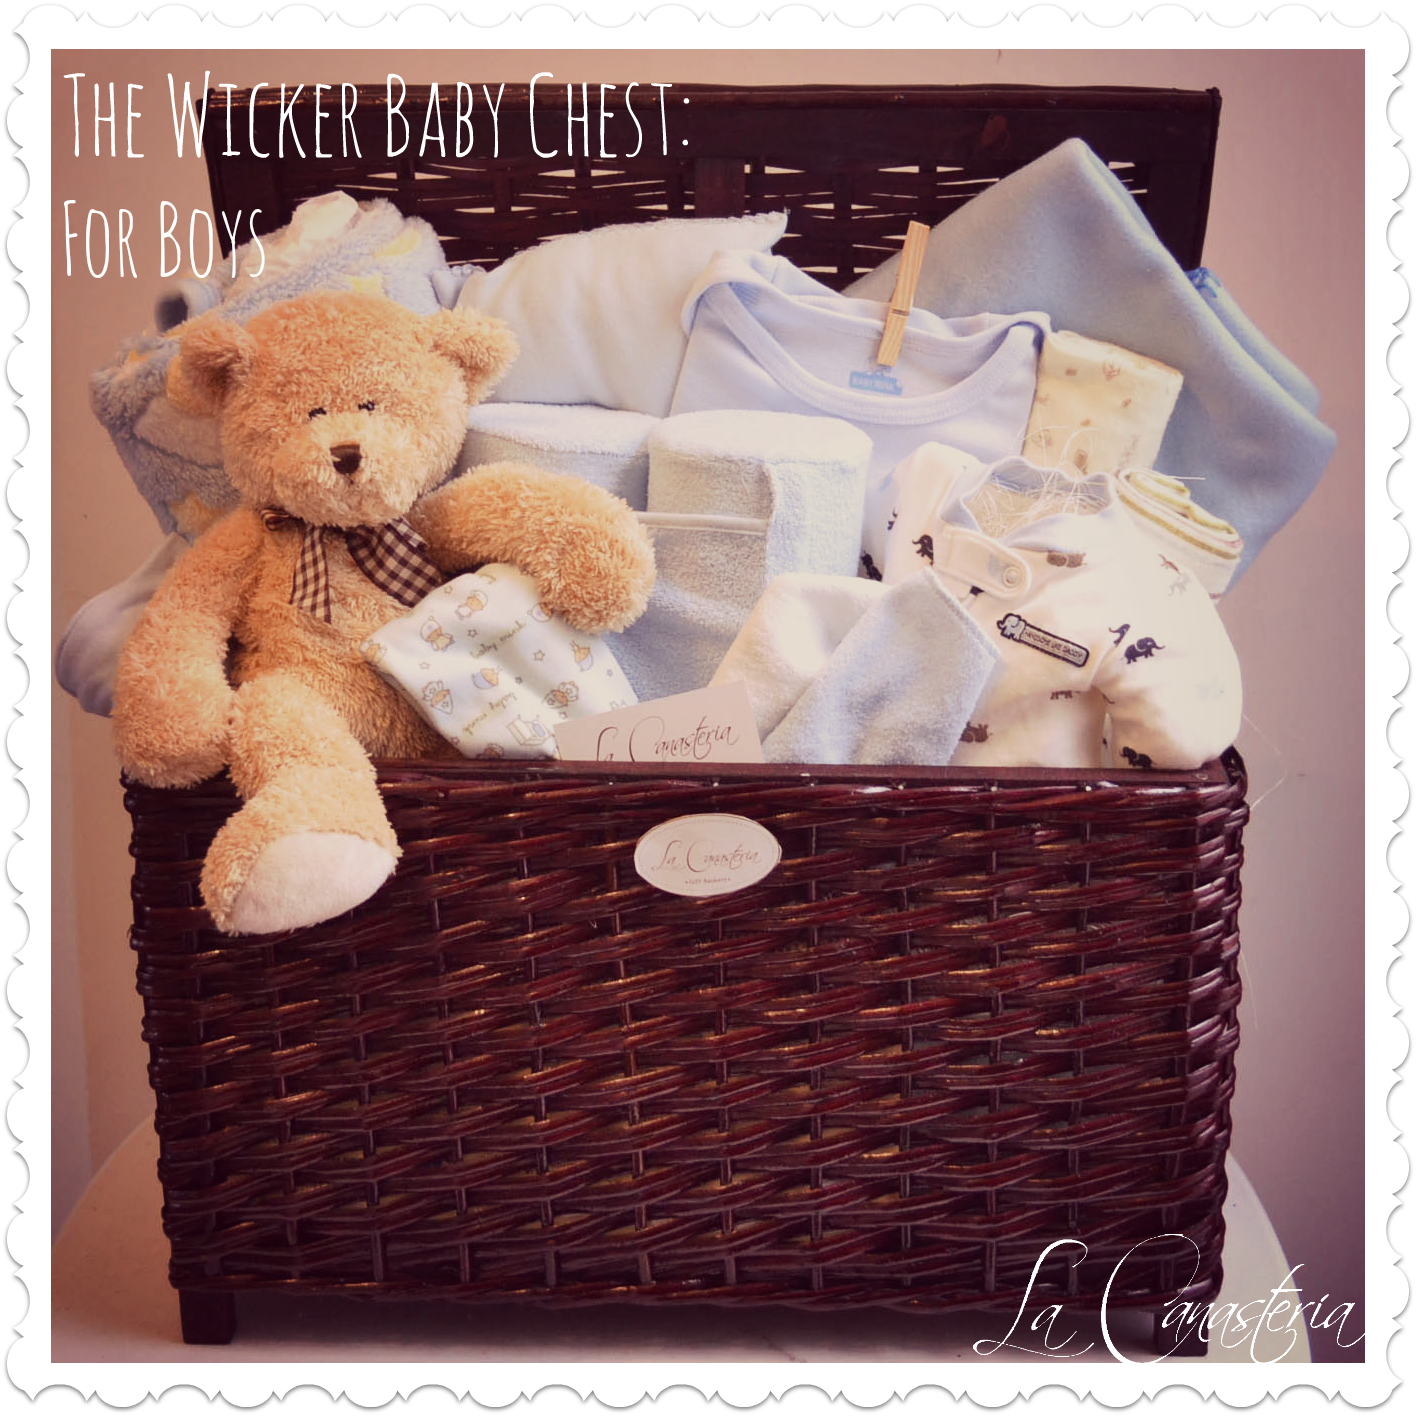 TheWickerBabyChest_forBoys_title_logo